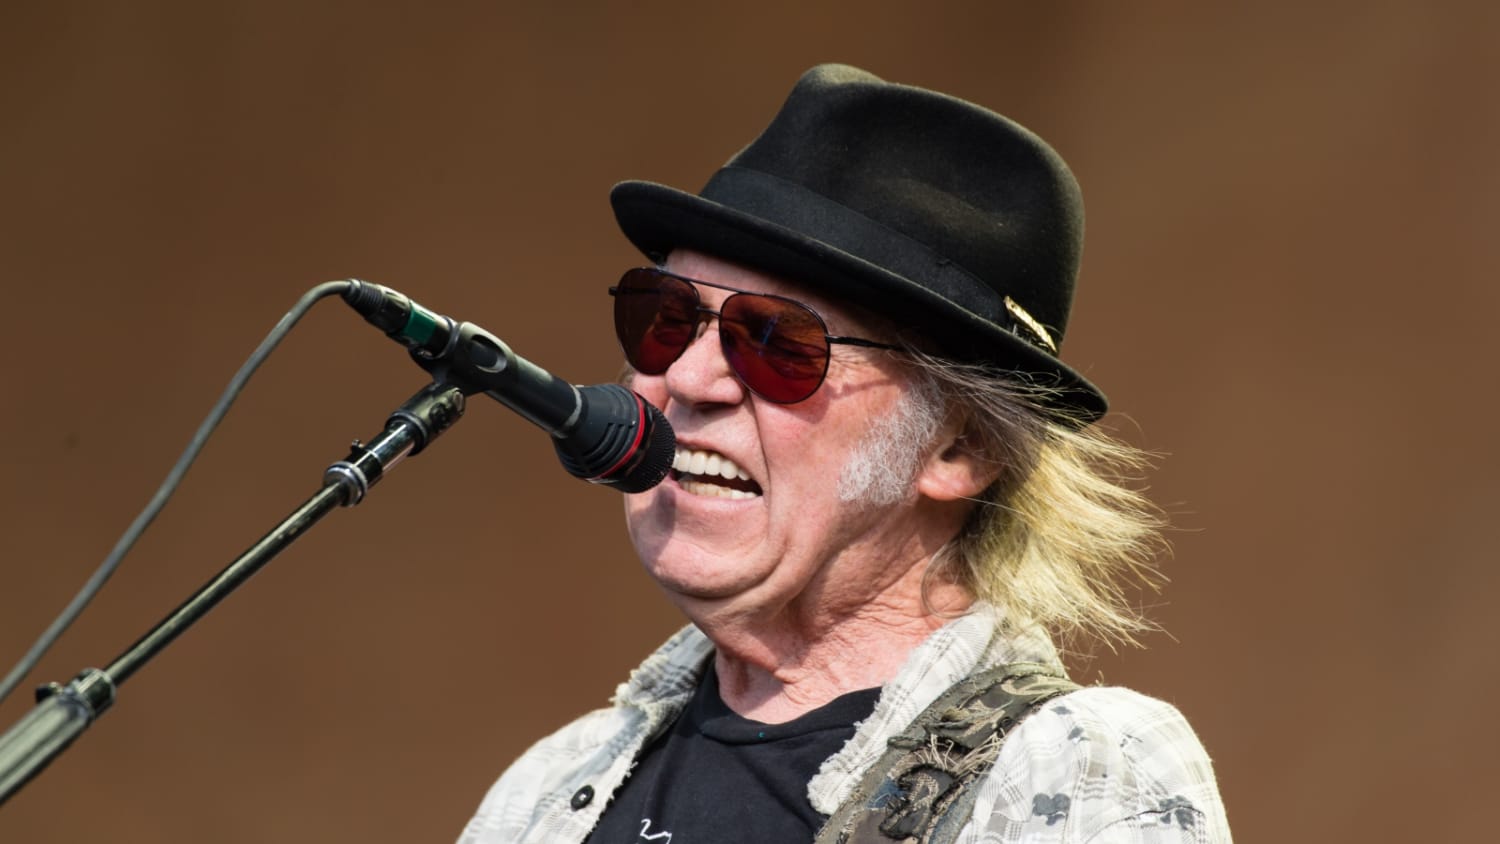 Neil Young on His Music at Trump's Mount Rushmore Rally: 'This Is NOT OK With Me'